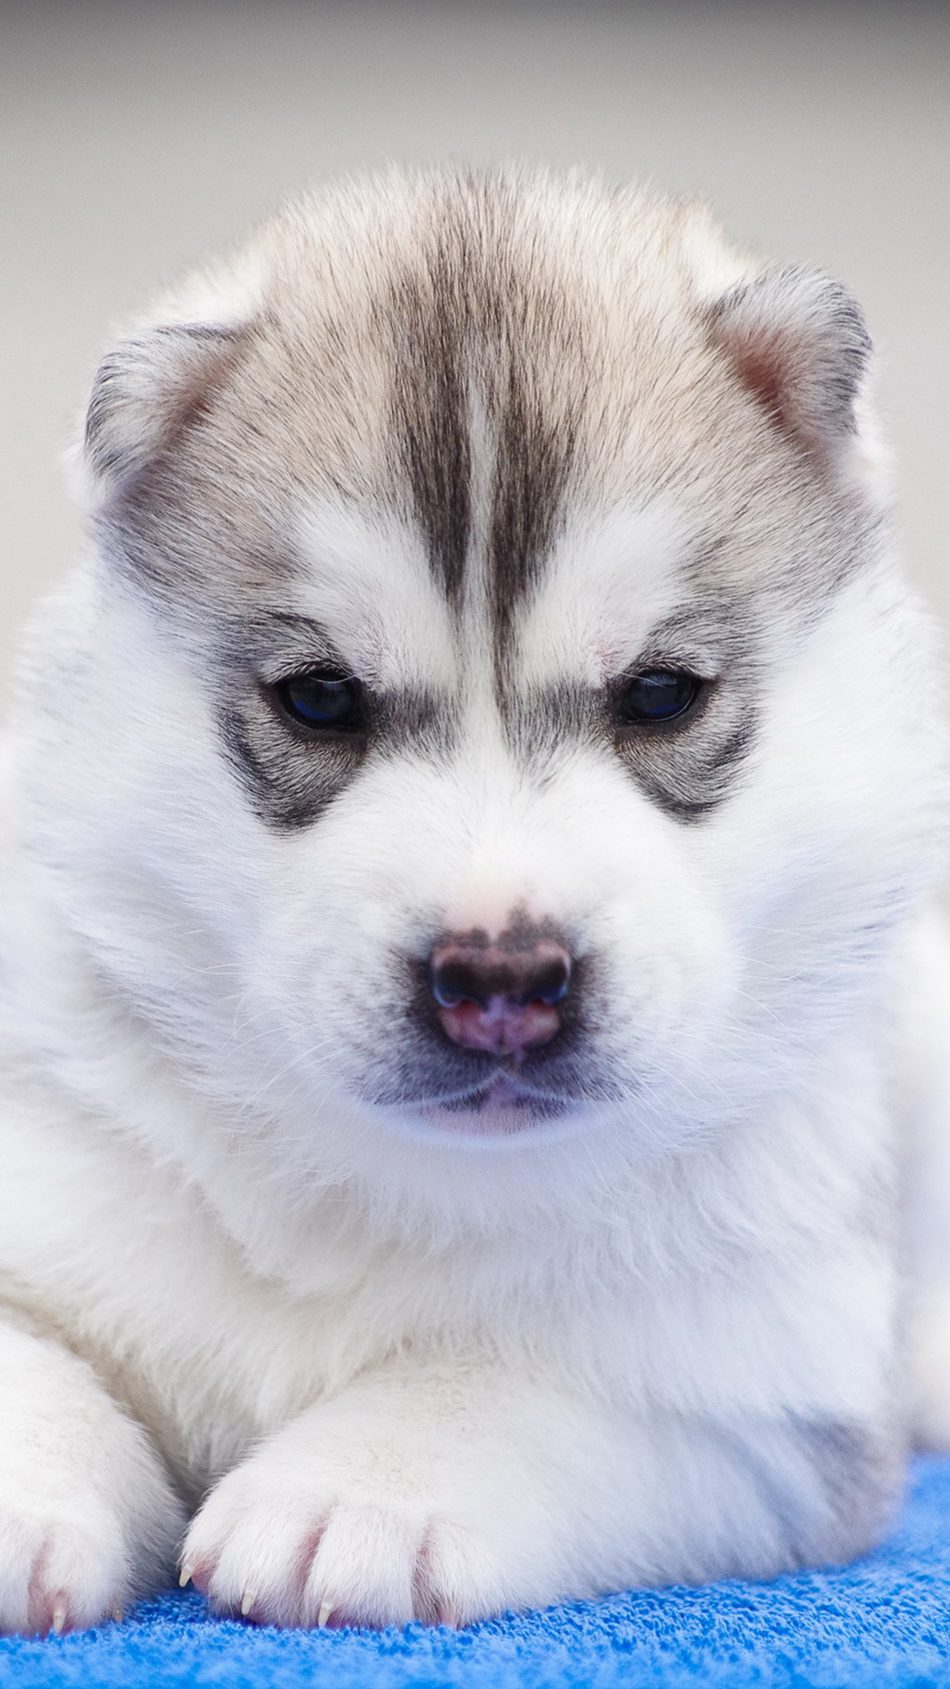 Husky Puppy Angry Pet Dog 4K Ultra HD Mobile Wallpaper